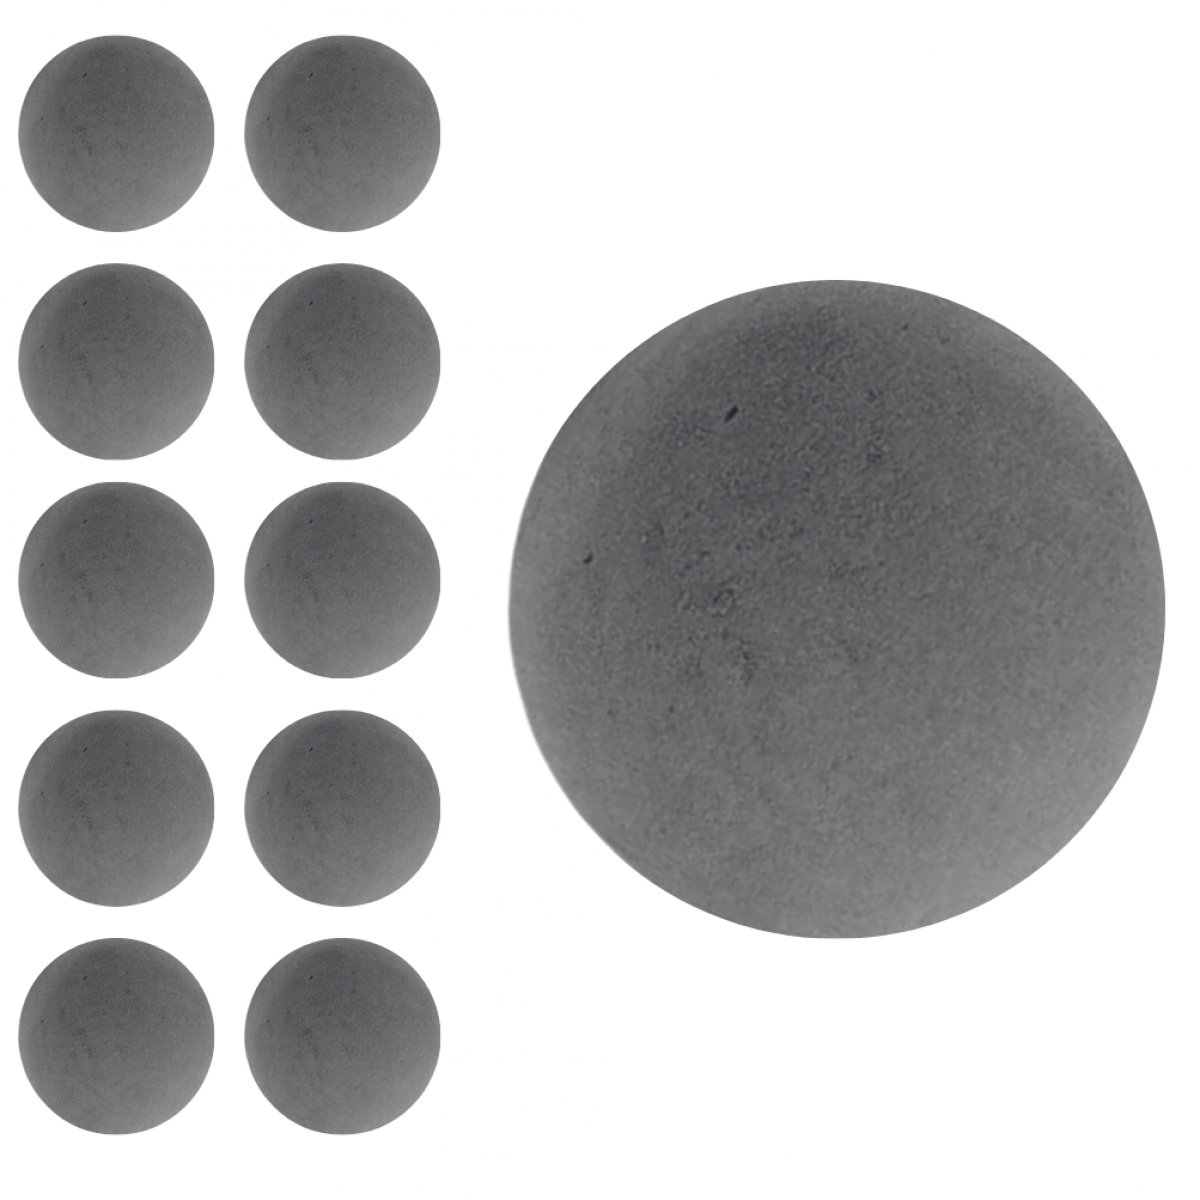 80mm (10 No) Oasis Midnight Floral Foam Sphere